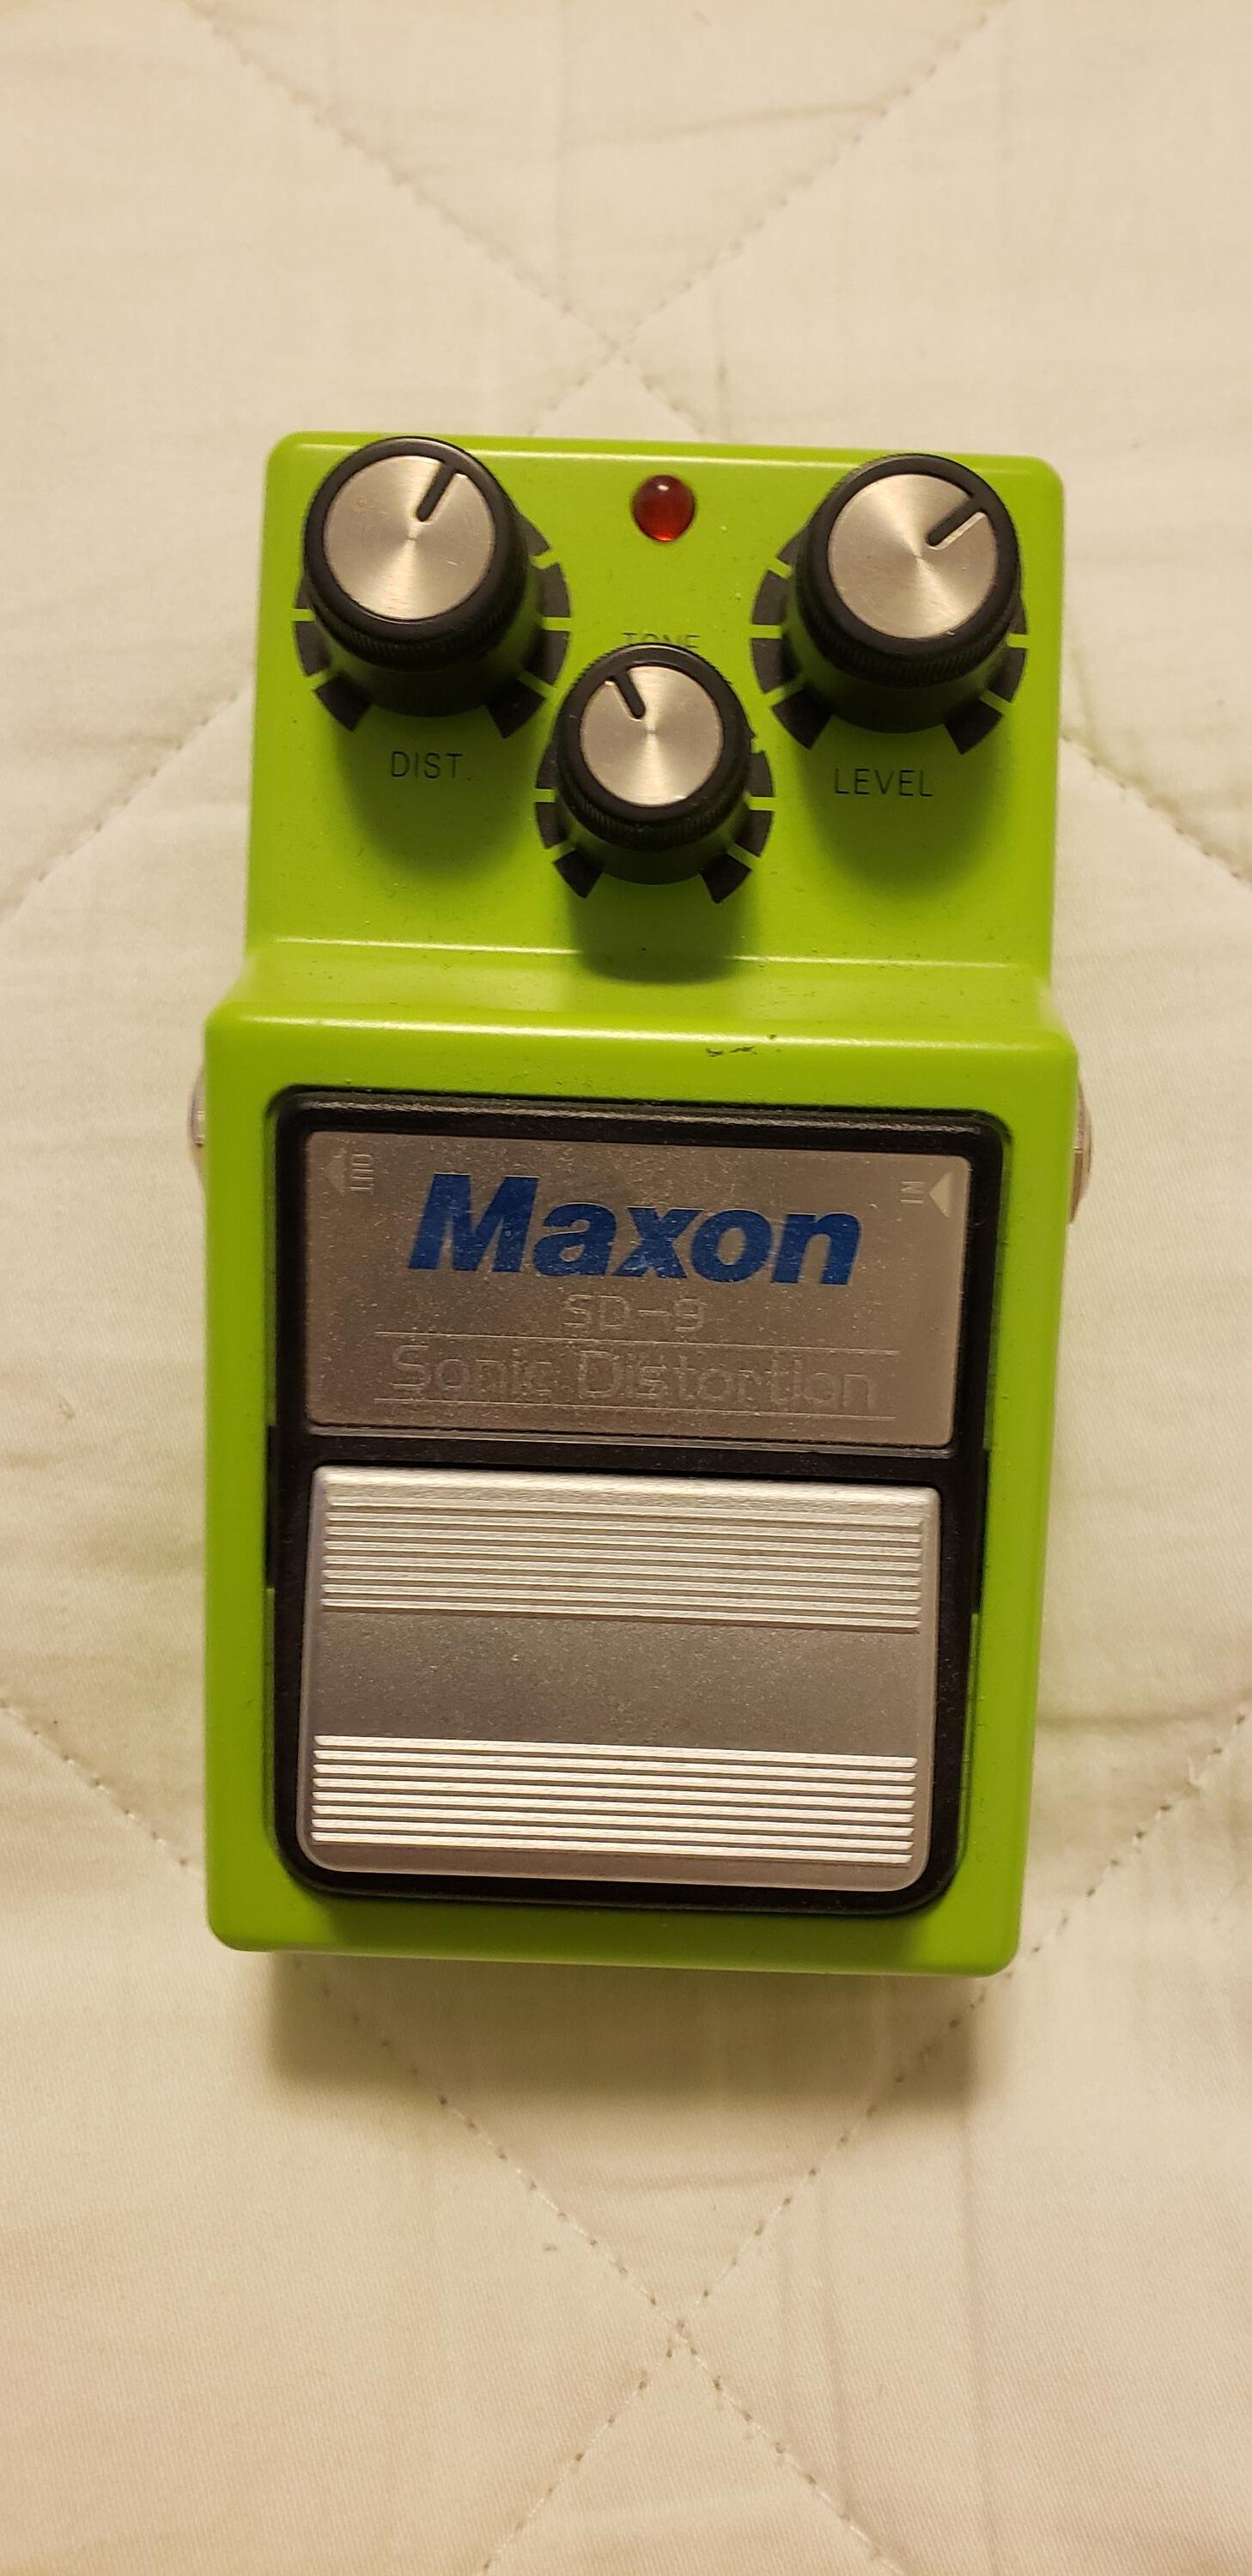 Used Maxon SD-9 Sonic Distortion Pedal - Sweetwater's Gear Exchange